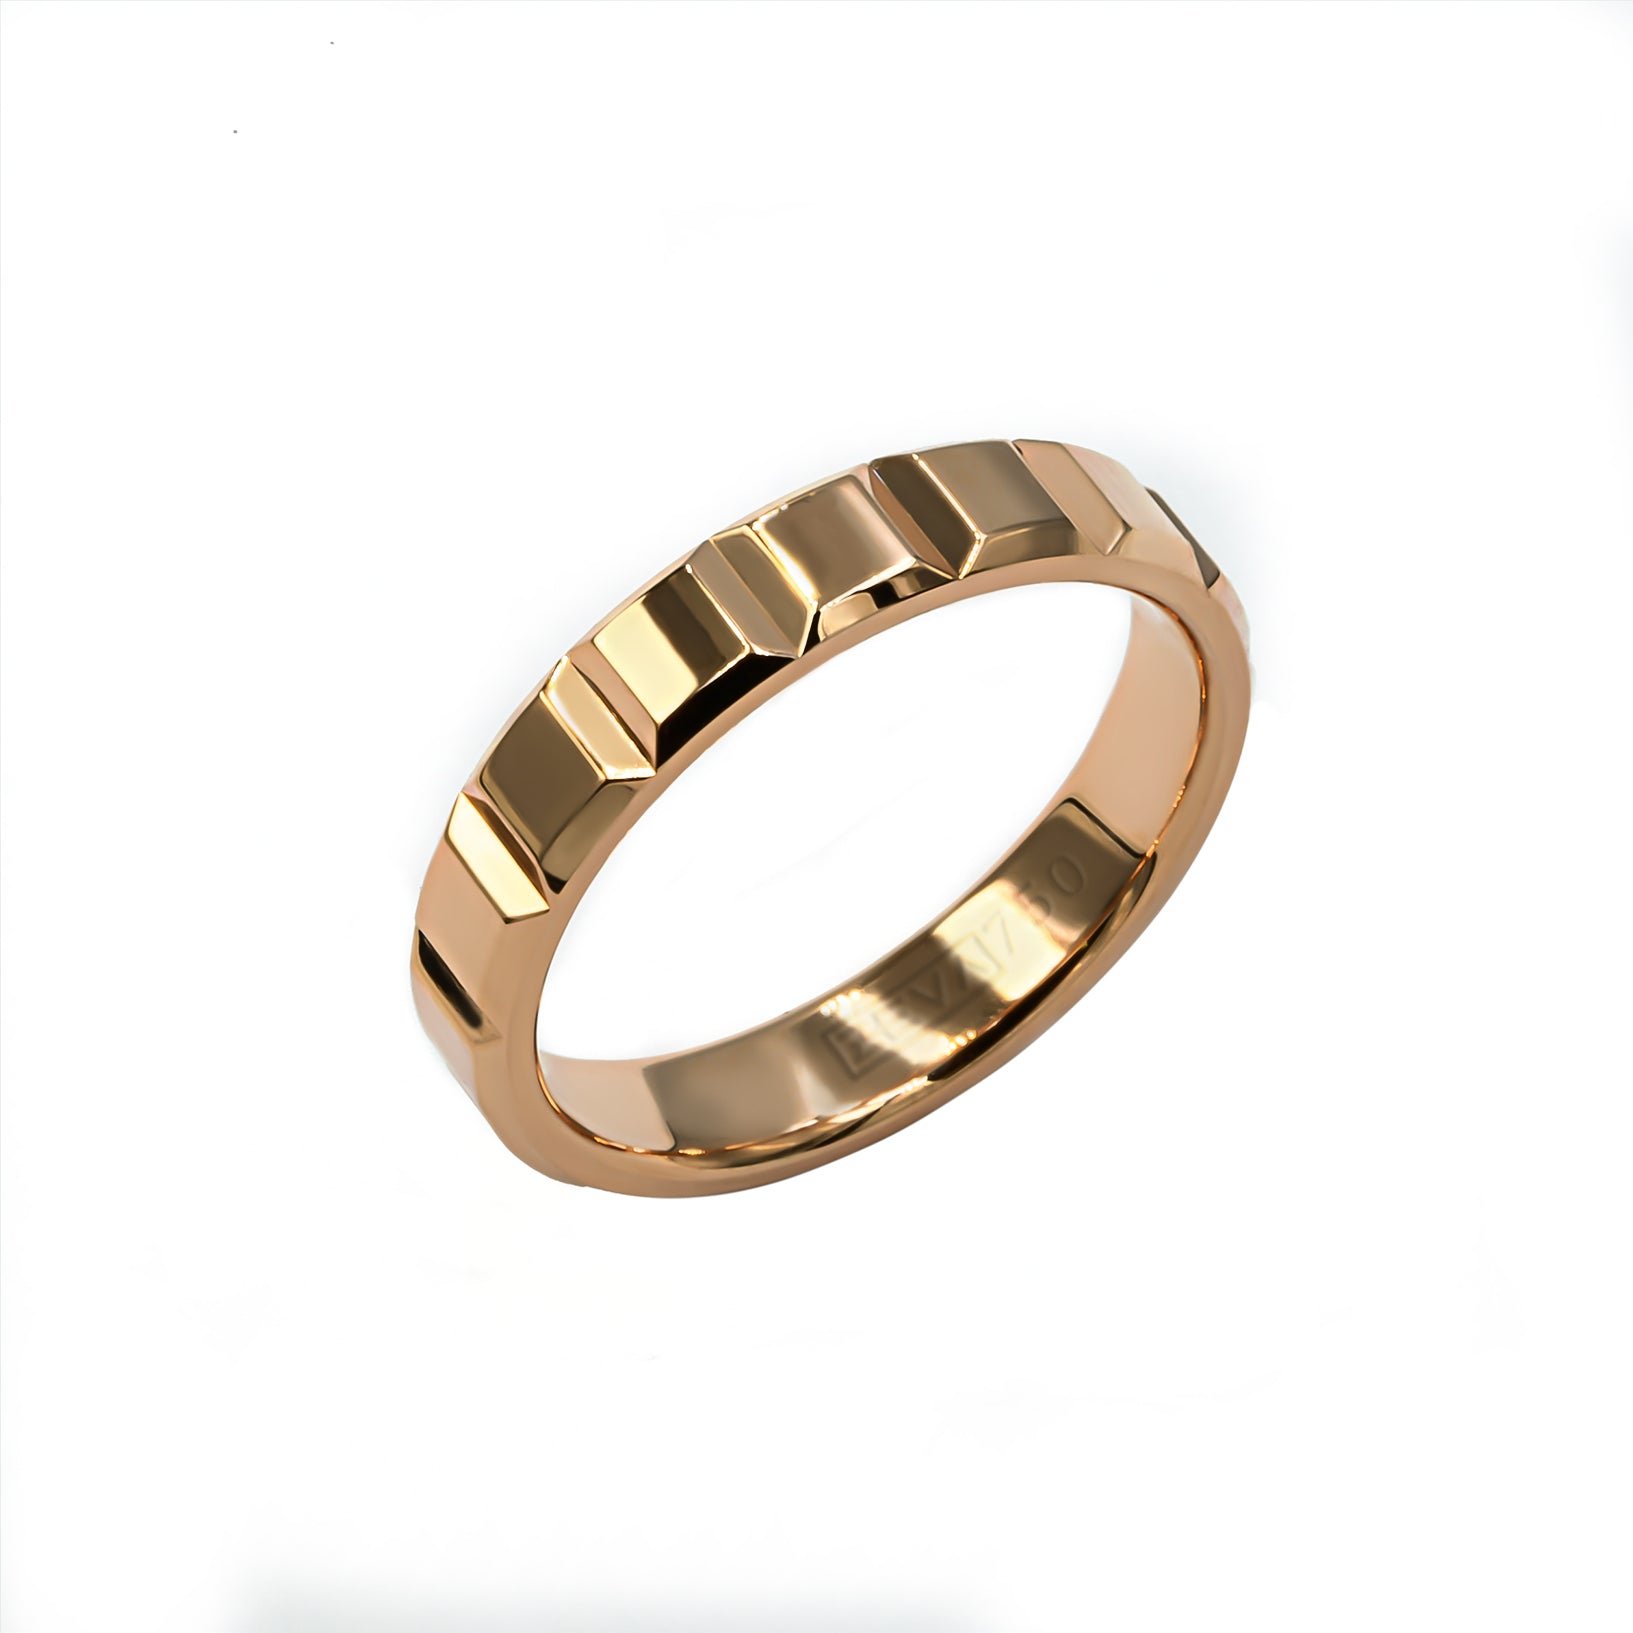 Ring CRUSH 4mm square shape red gold 18K 750